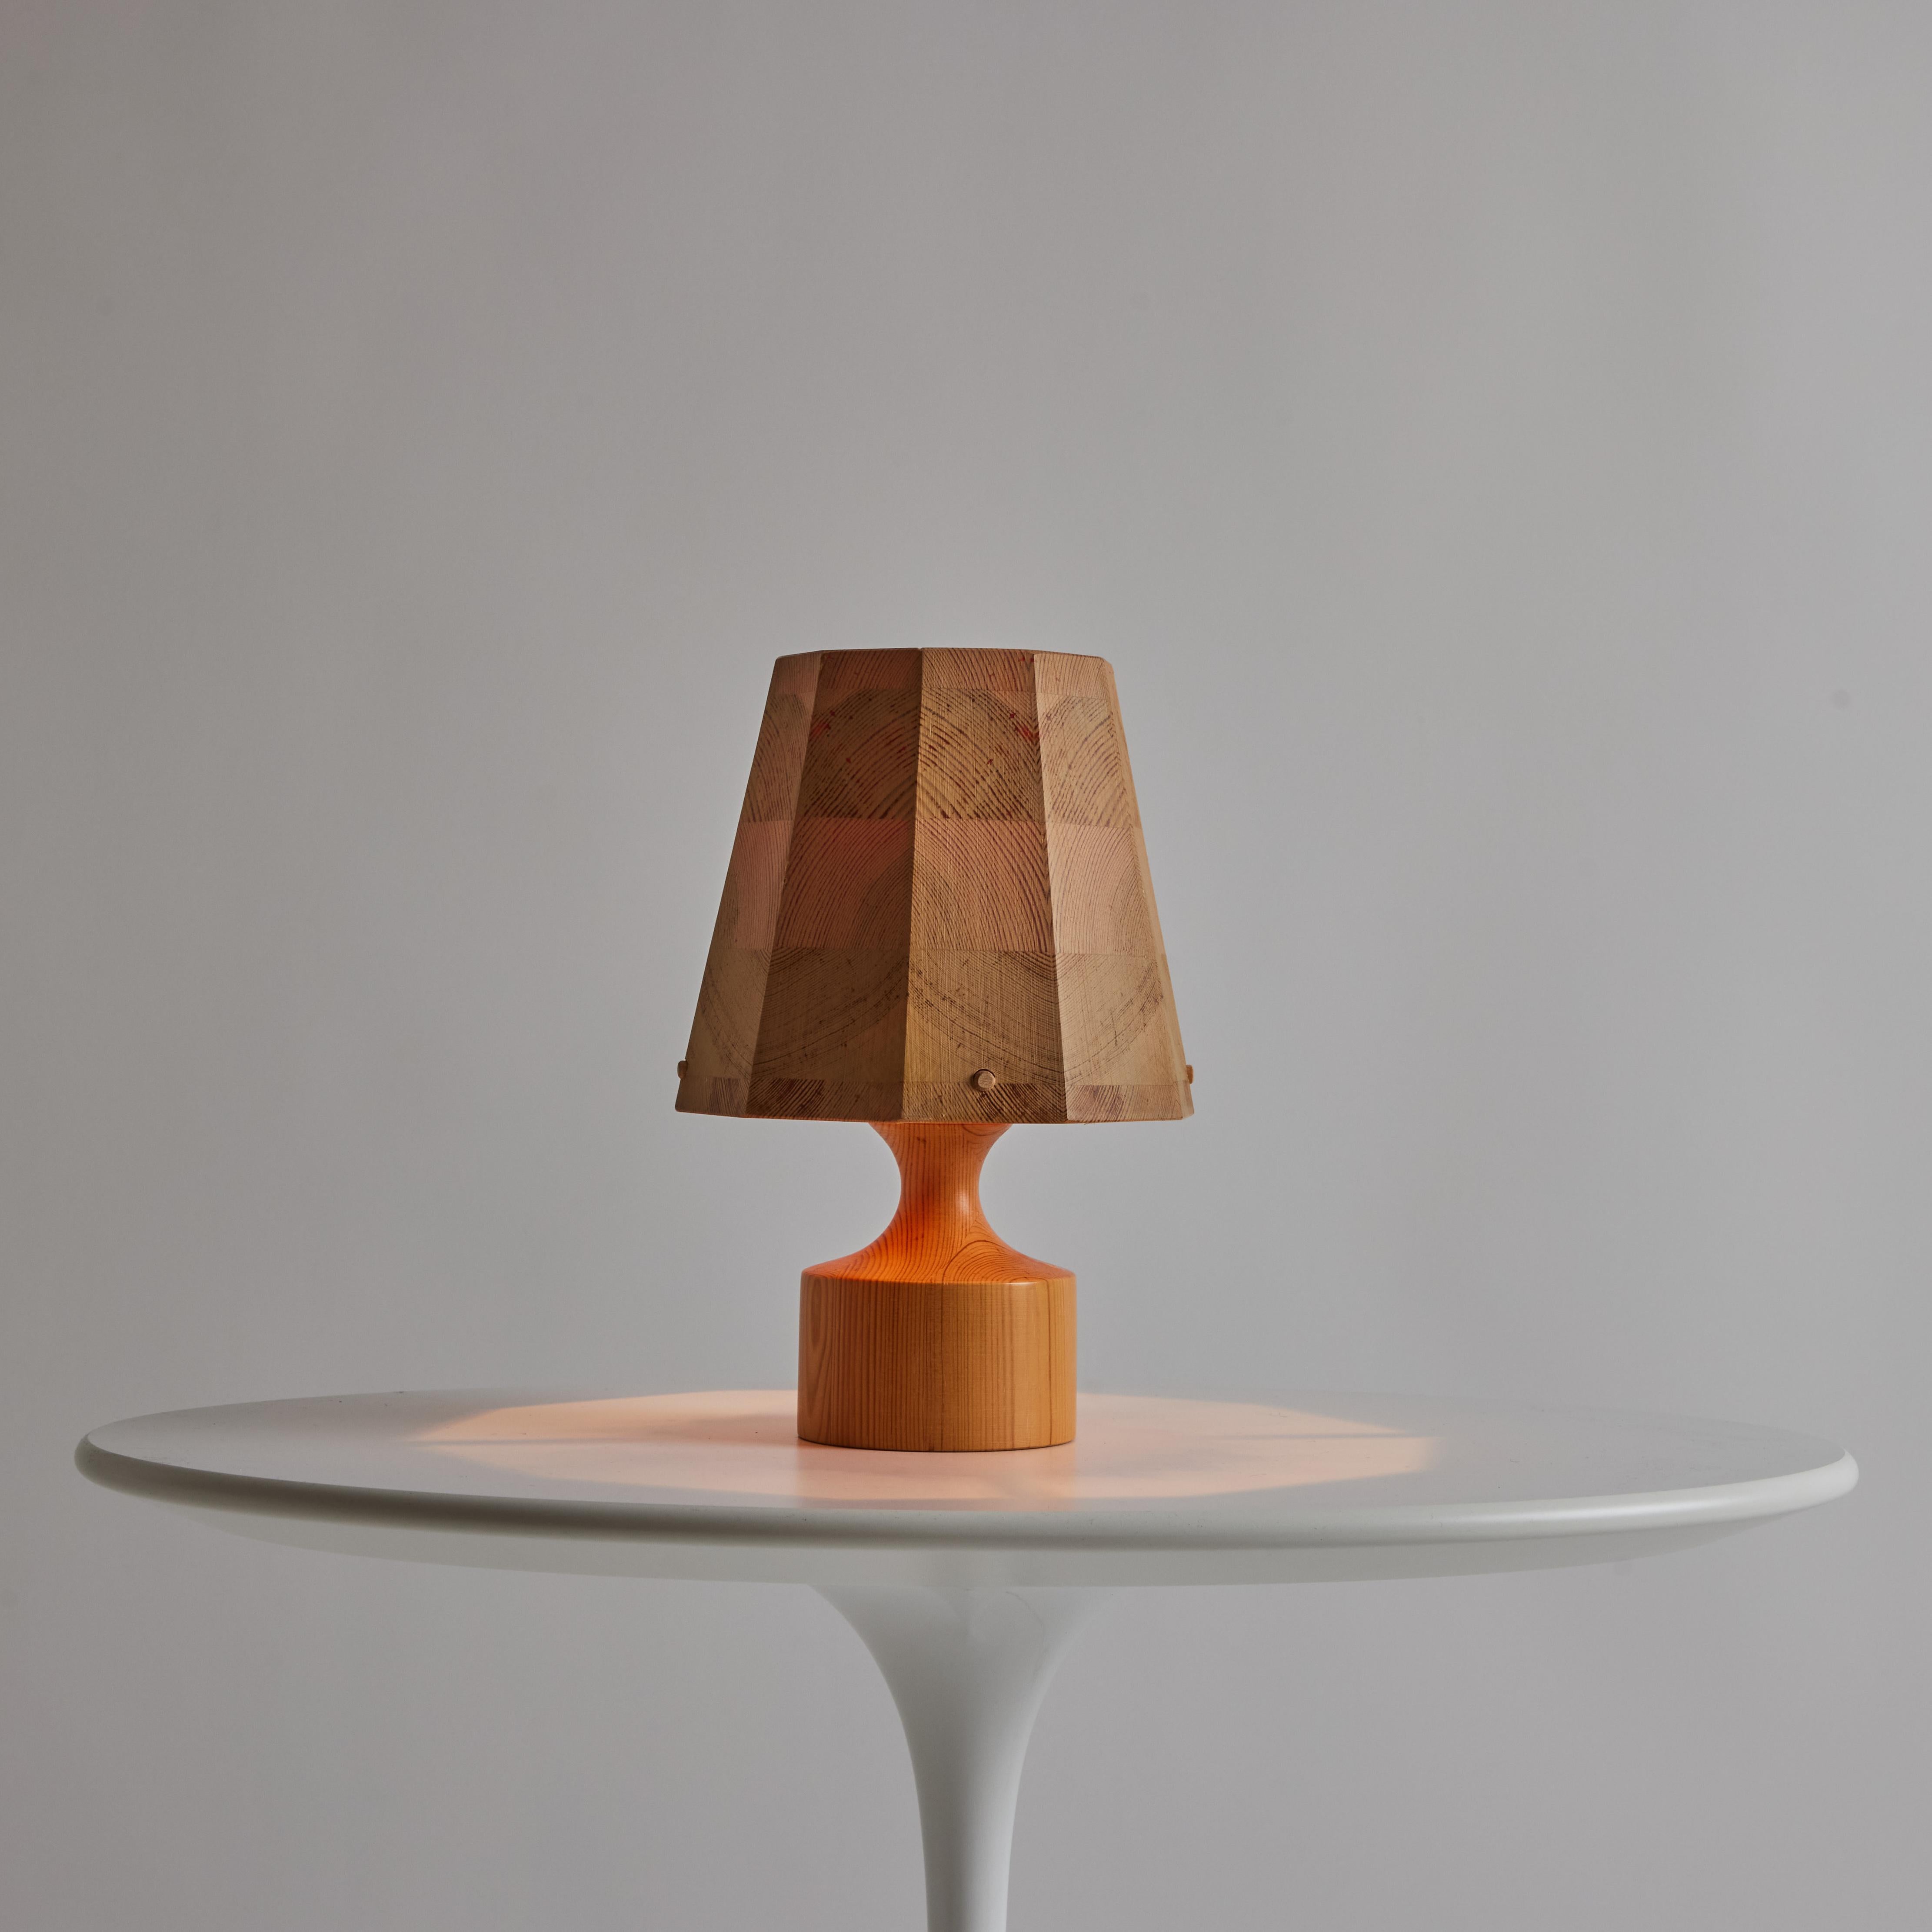 Swedish Pair of 1960s Wood Table Lamps Attributed to Hans-Agne Jakobsson for AB Ellysett For Sale